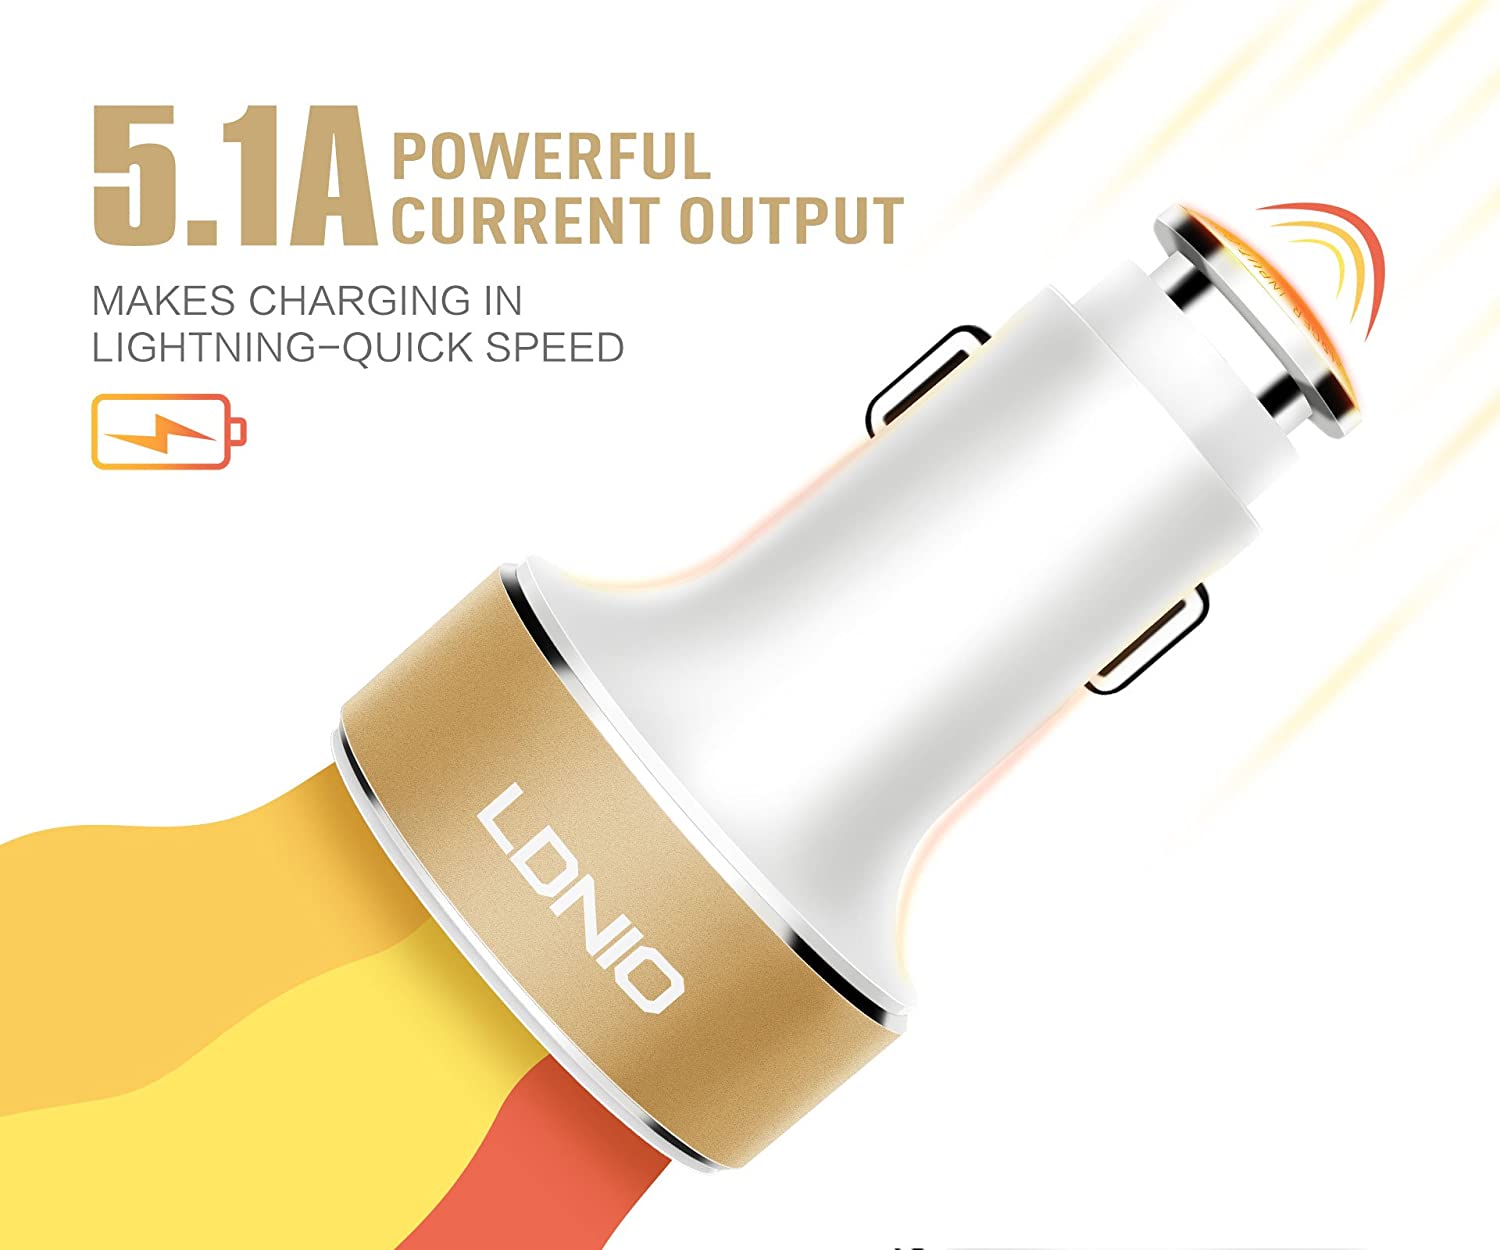 LDNIO 3 USB Port Universal Charging Car Charger For Mobile Phone 5V/5.1A Adapter